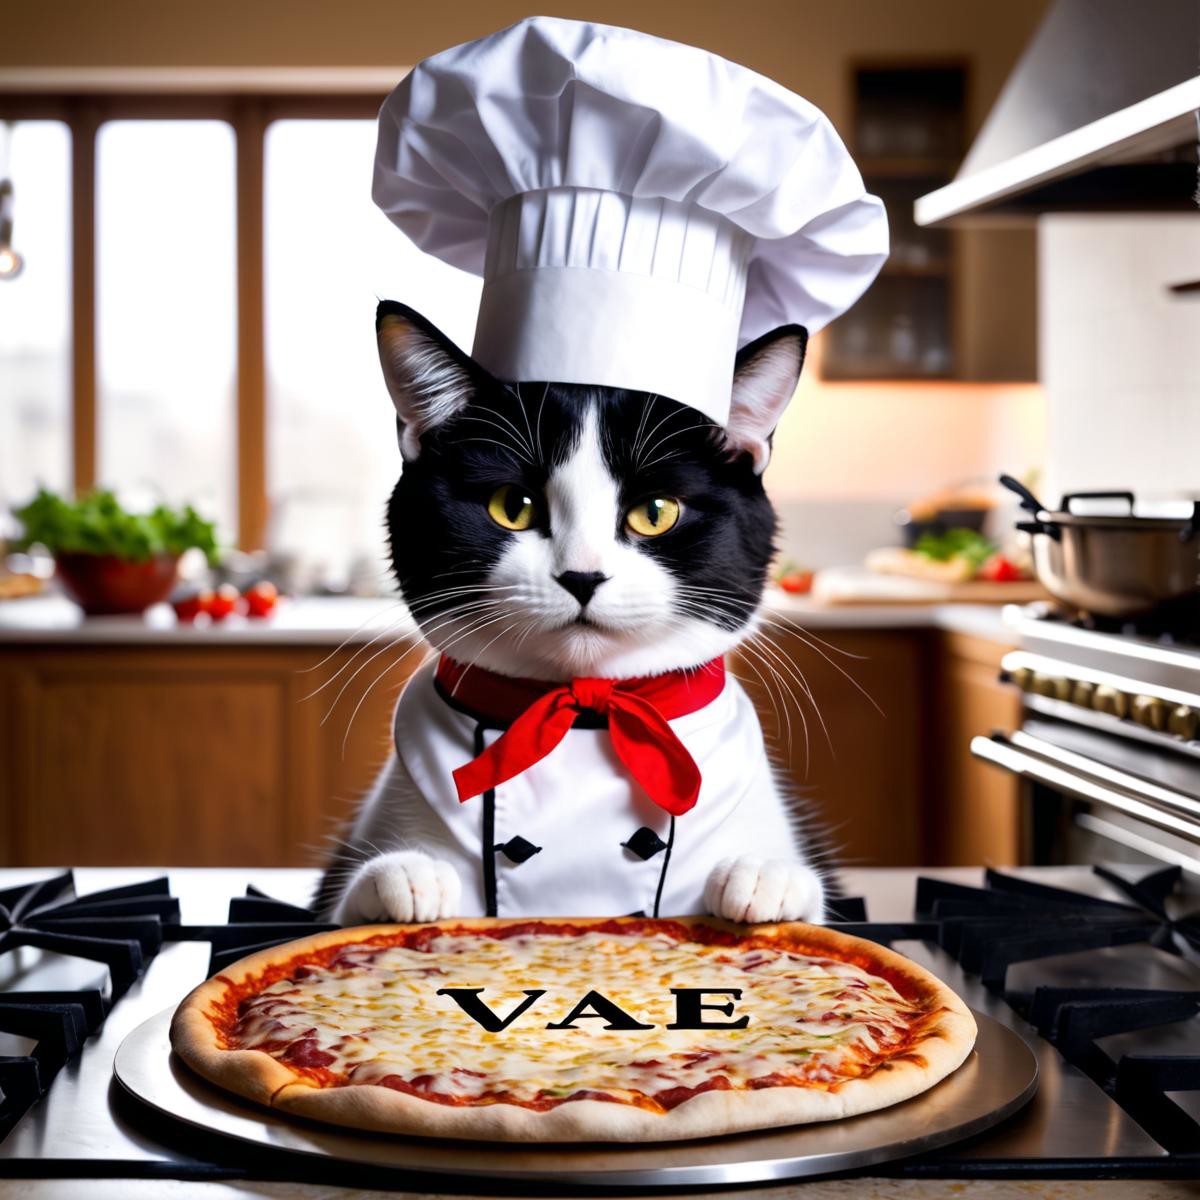 a cat chef is baking a pizza with the text "VAE" on it in an ofen